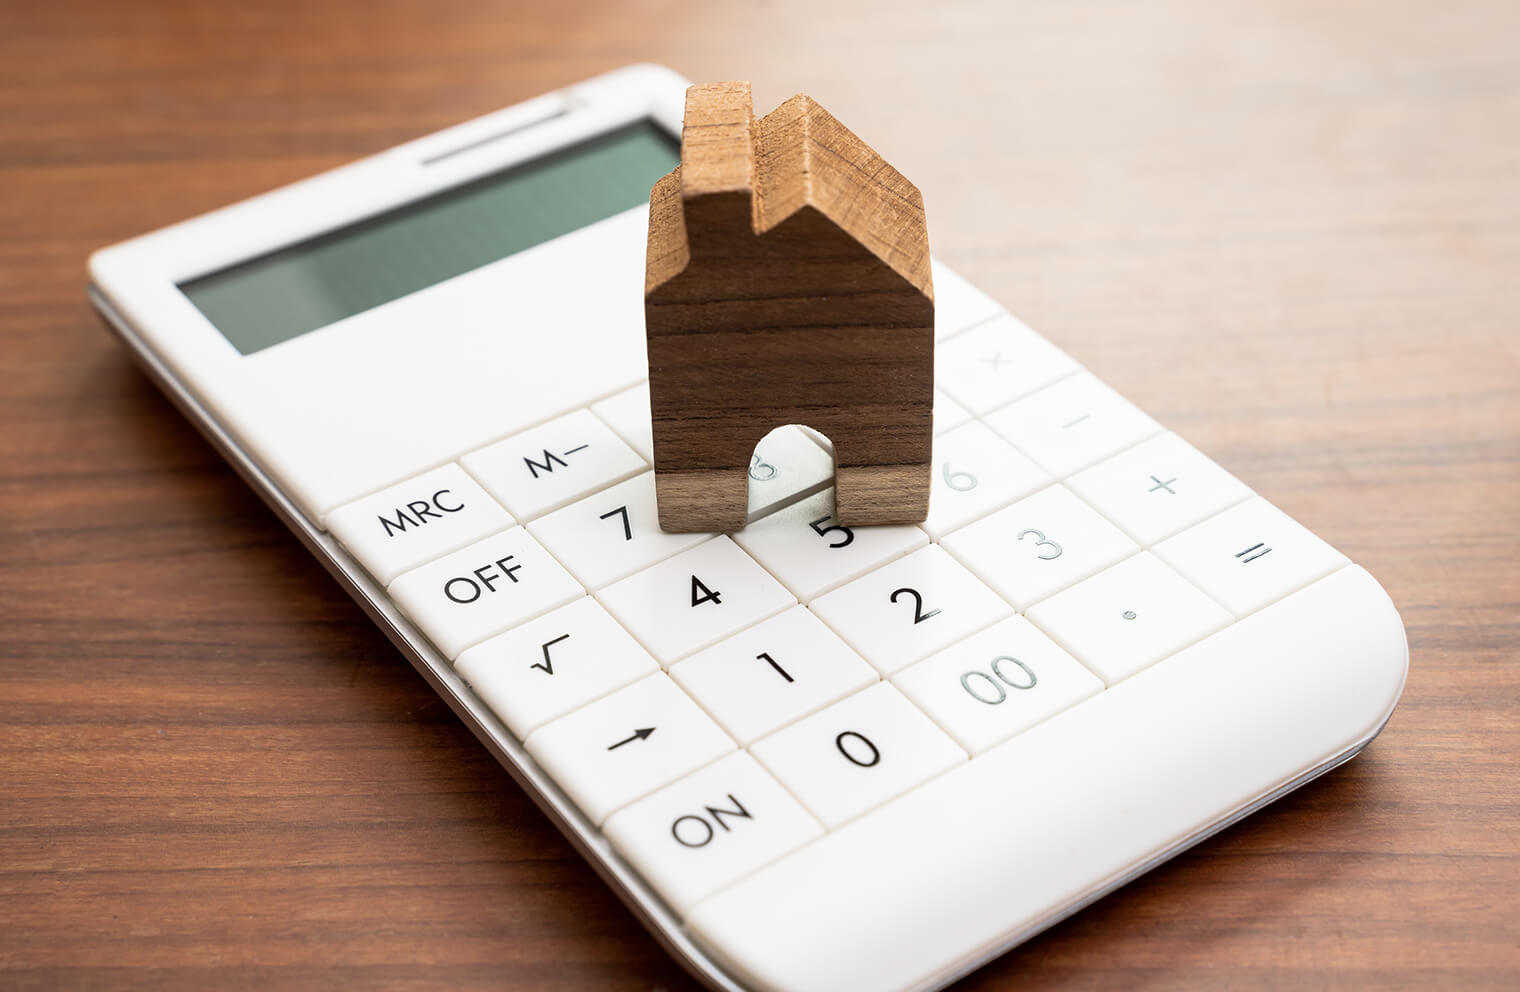 Close up image of a tiny wooden house on top of a white calculator that is on top of a wooden desk.